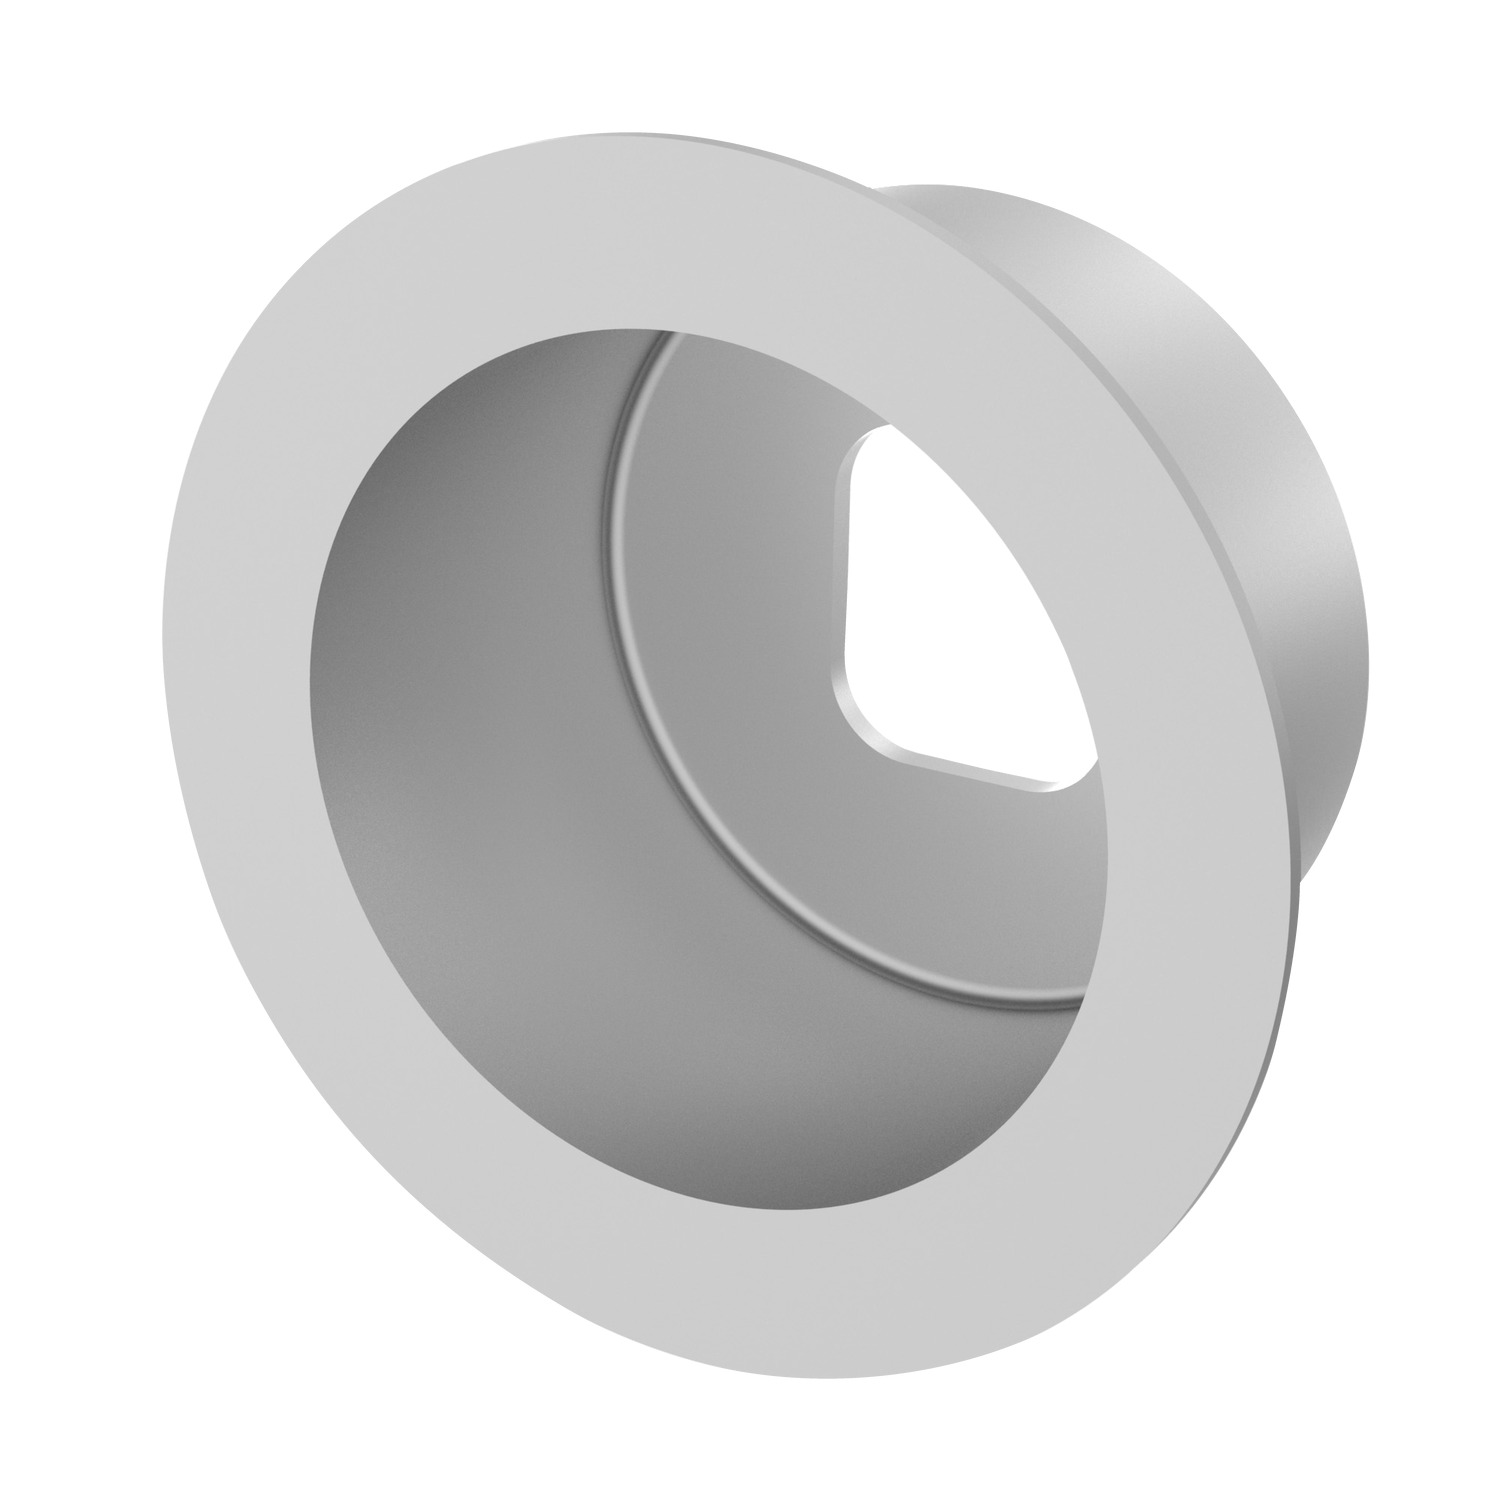 A0420 Recessed Spacer - for Isolation Panels and Covers